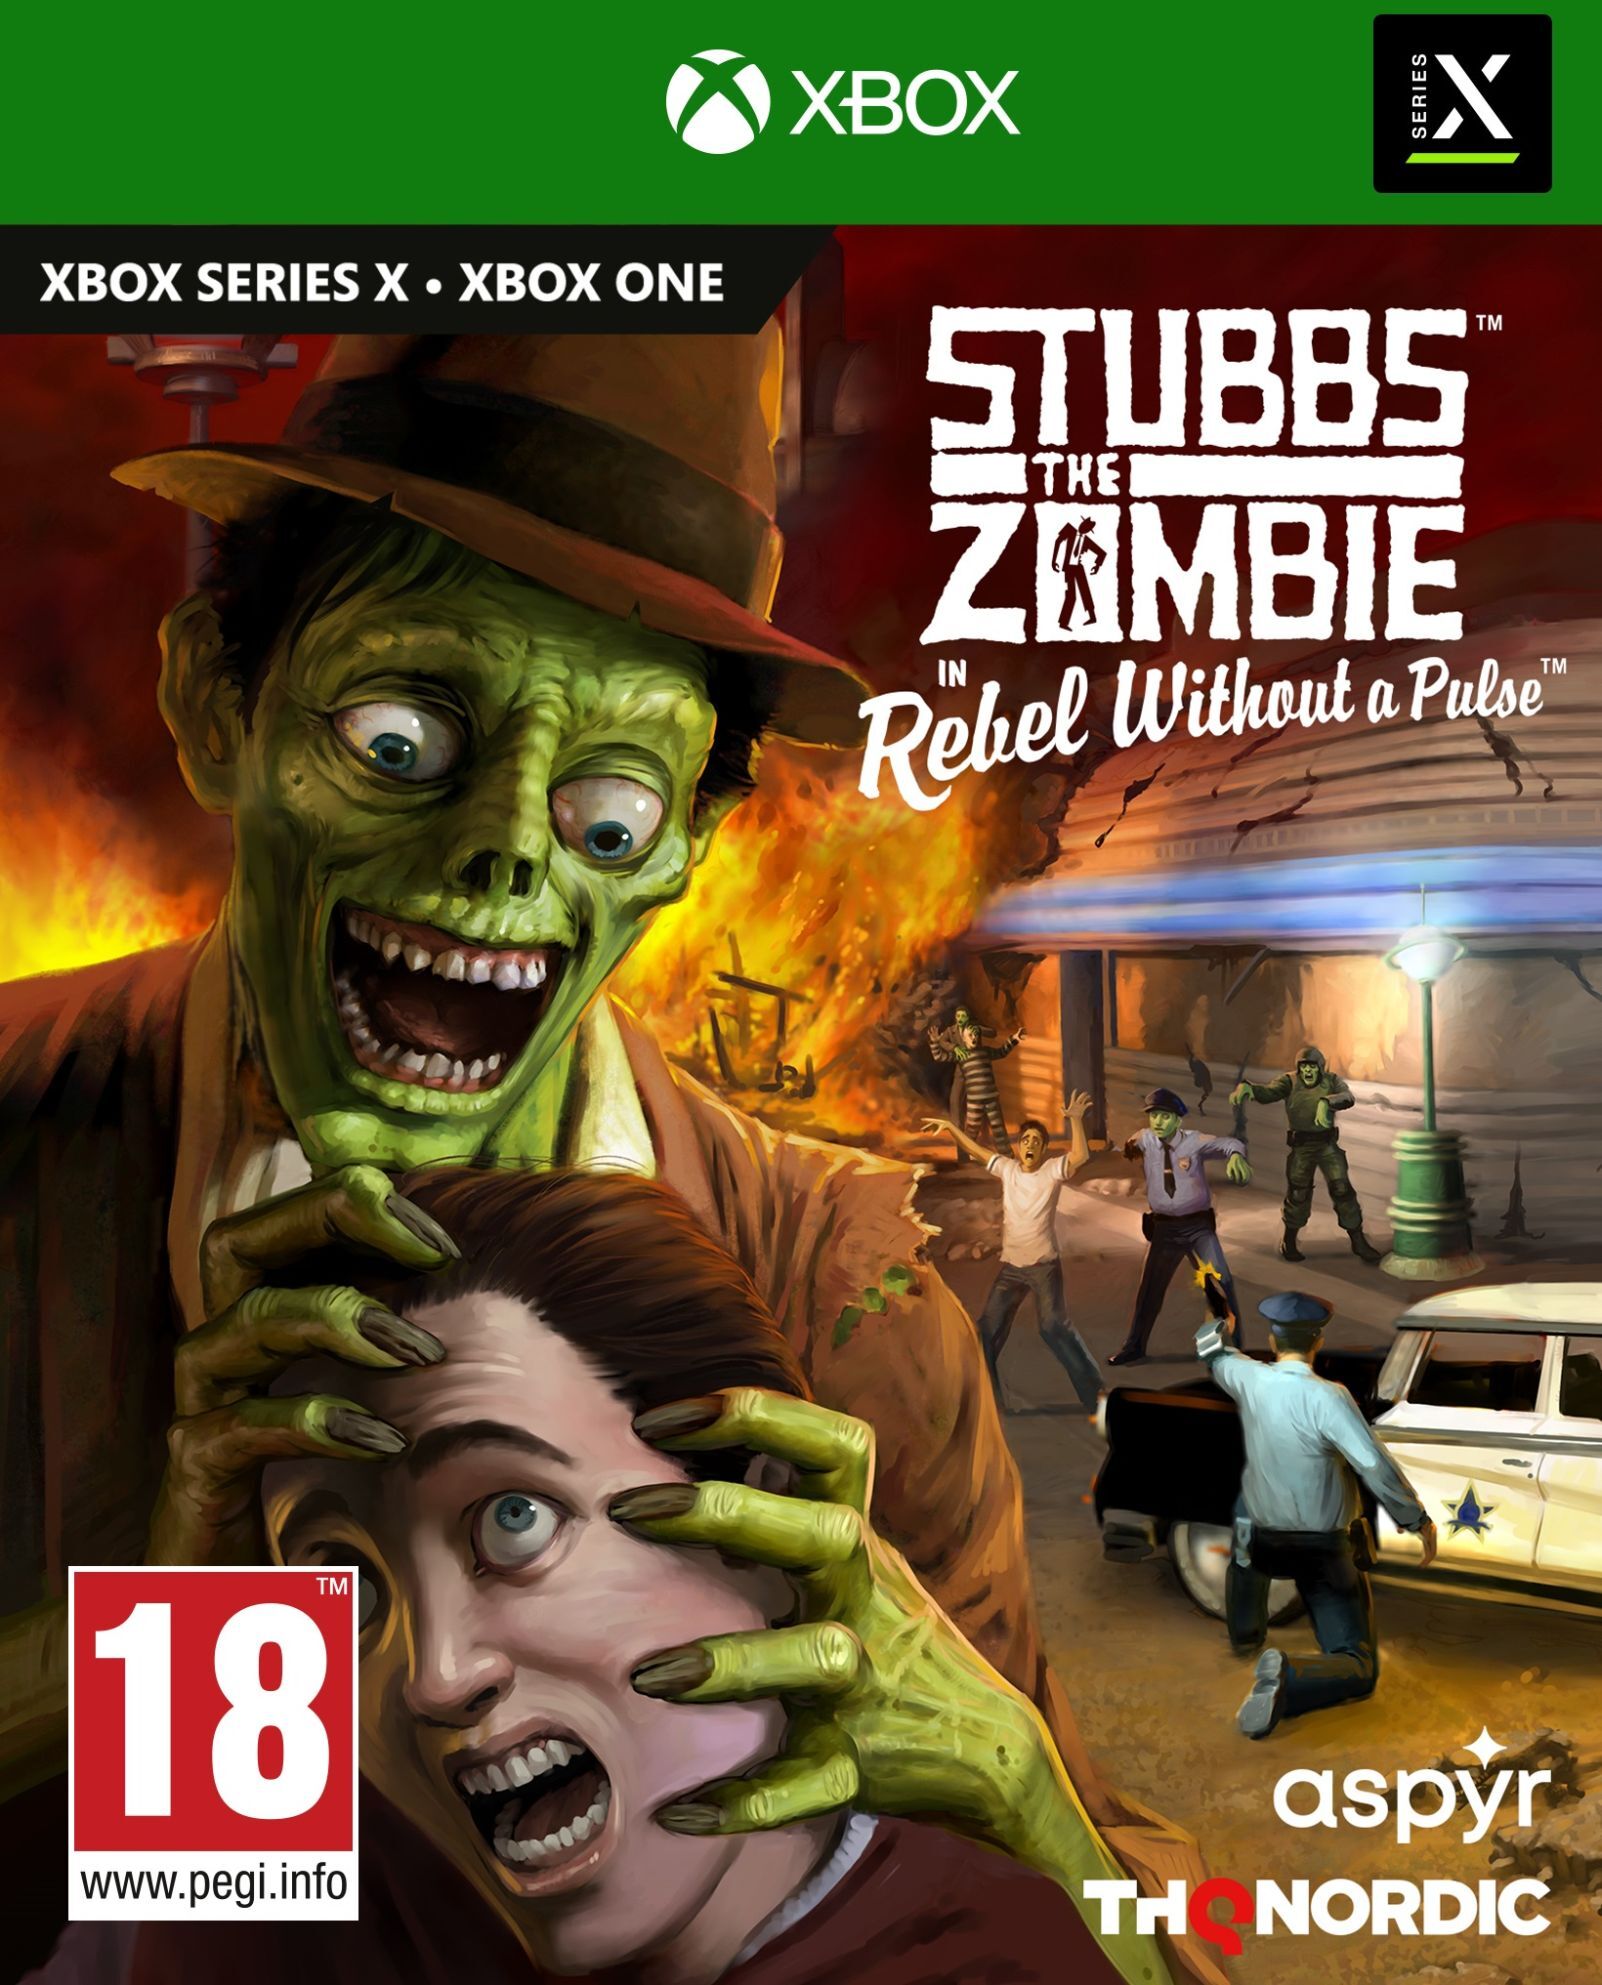 THQ Nordic - Stubbs the Zombie - Rebel Without a Pulse [XSX] (F/I)